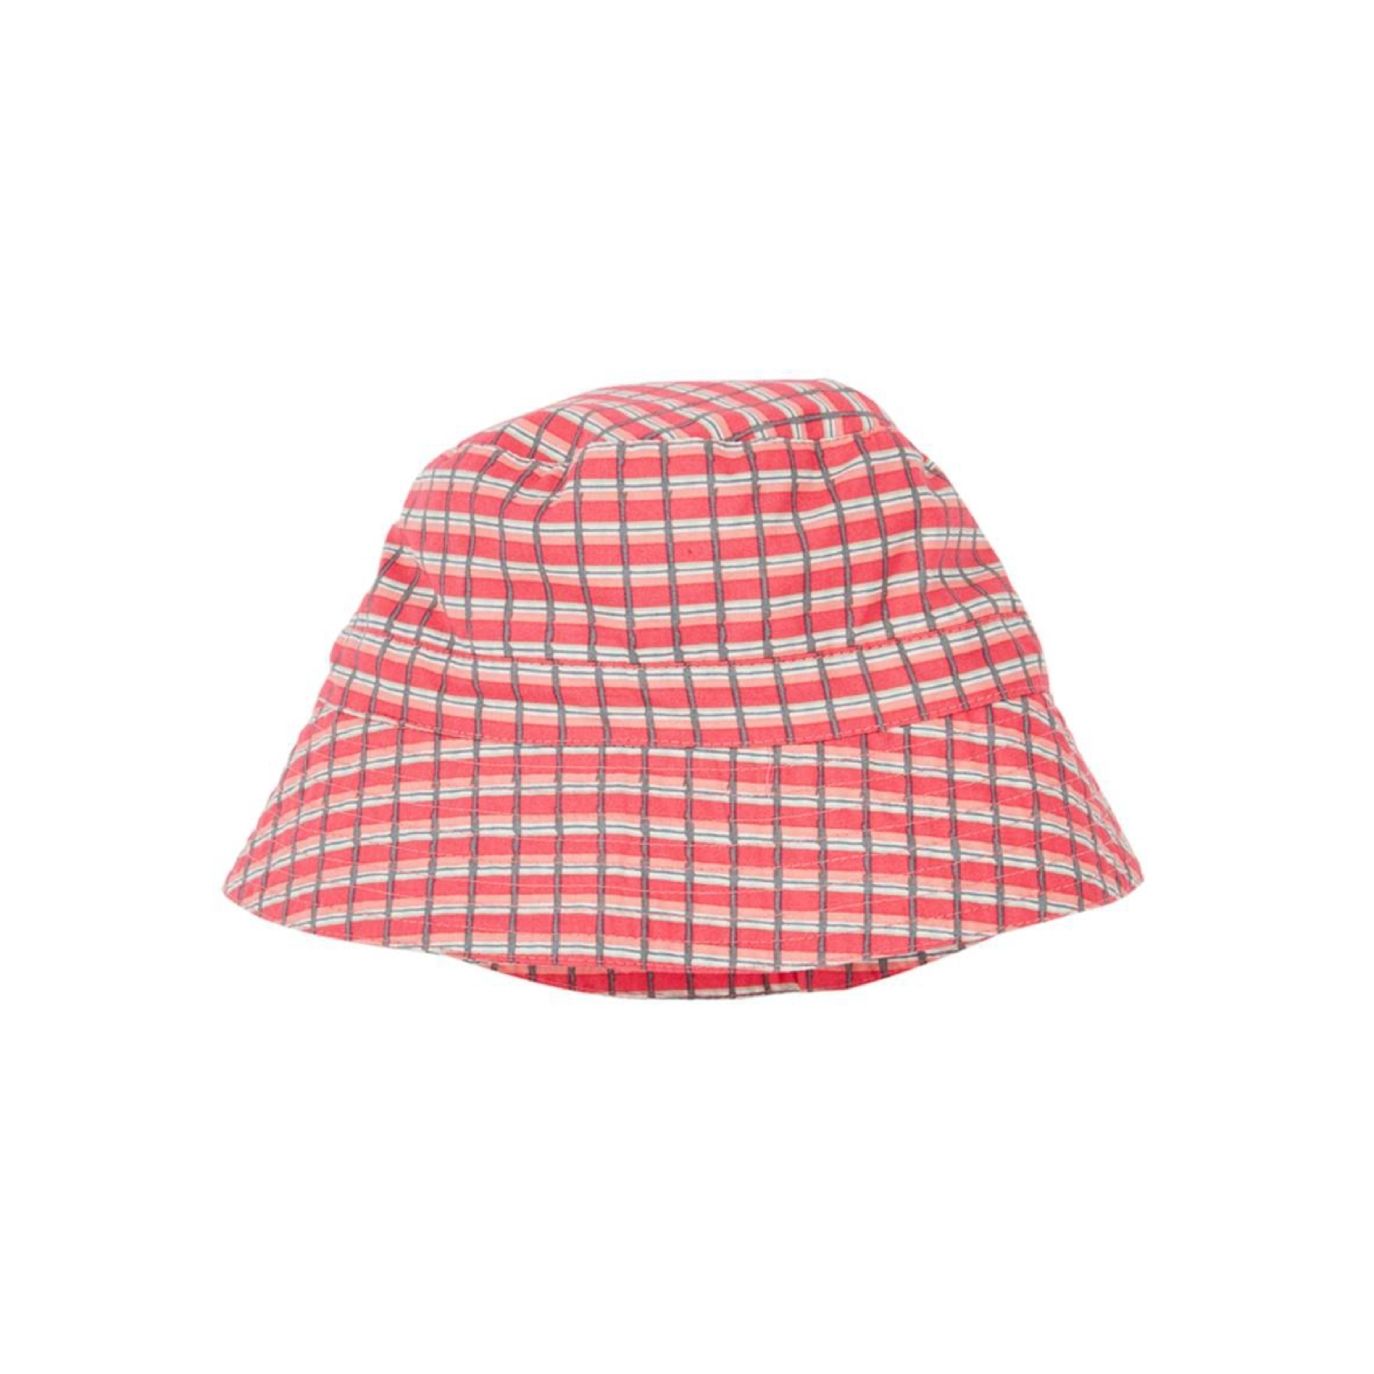 Caramel Baby & Child - Wembley Baby Hat Red - Caps and hats - 